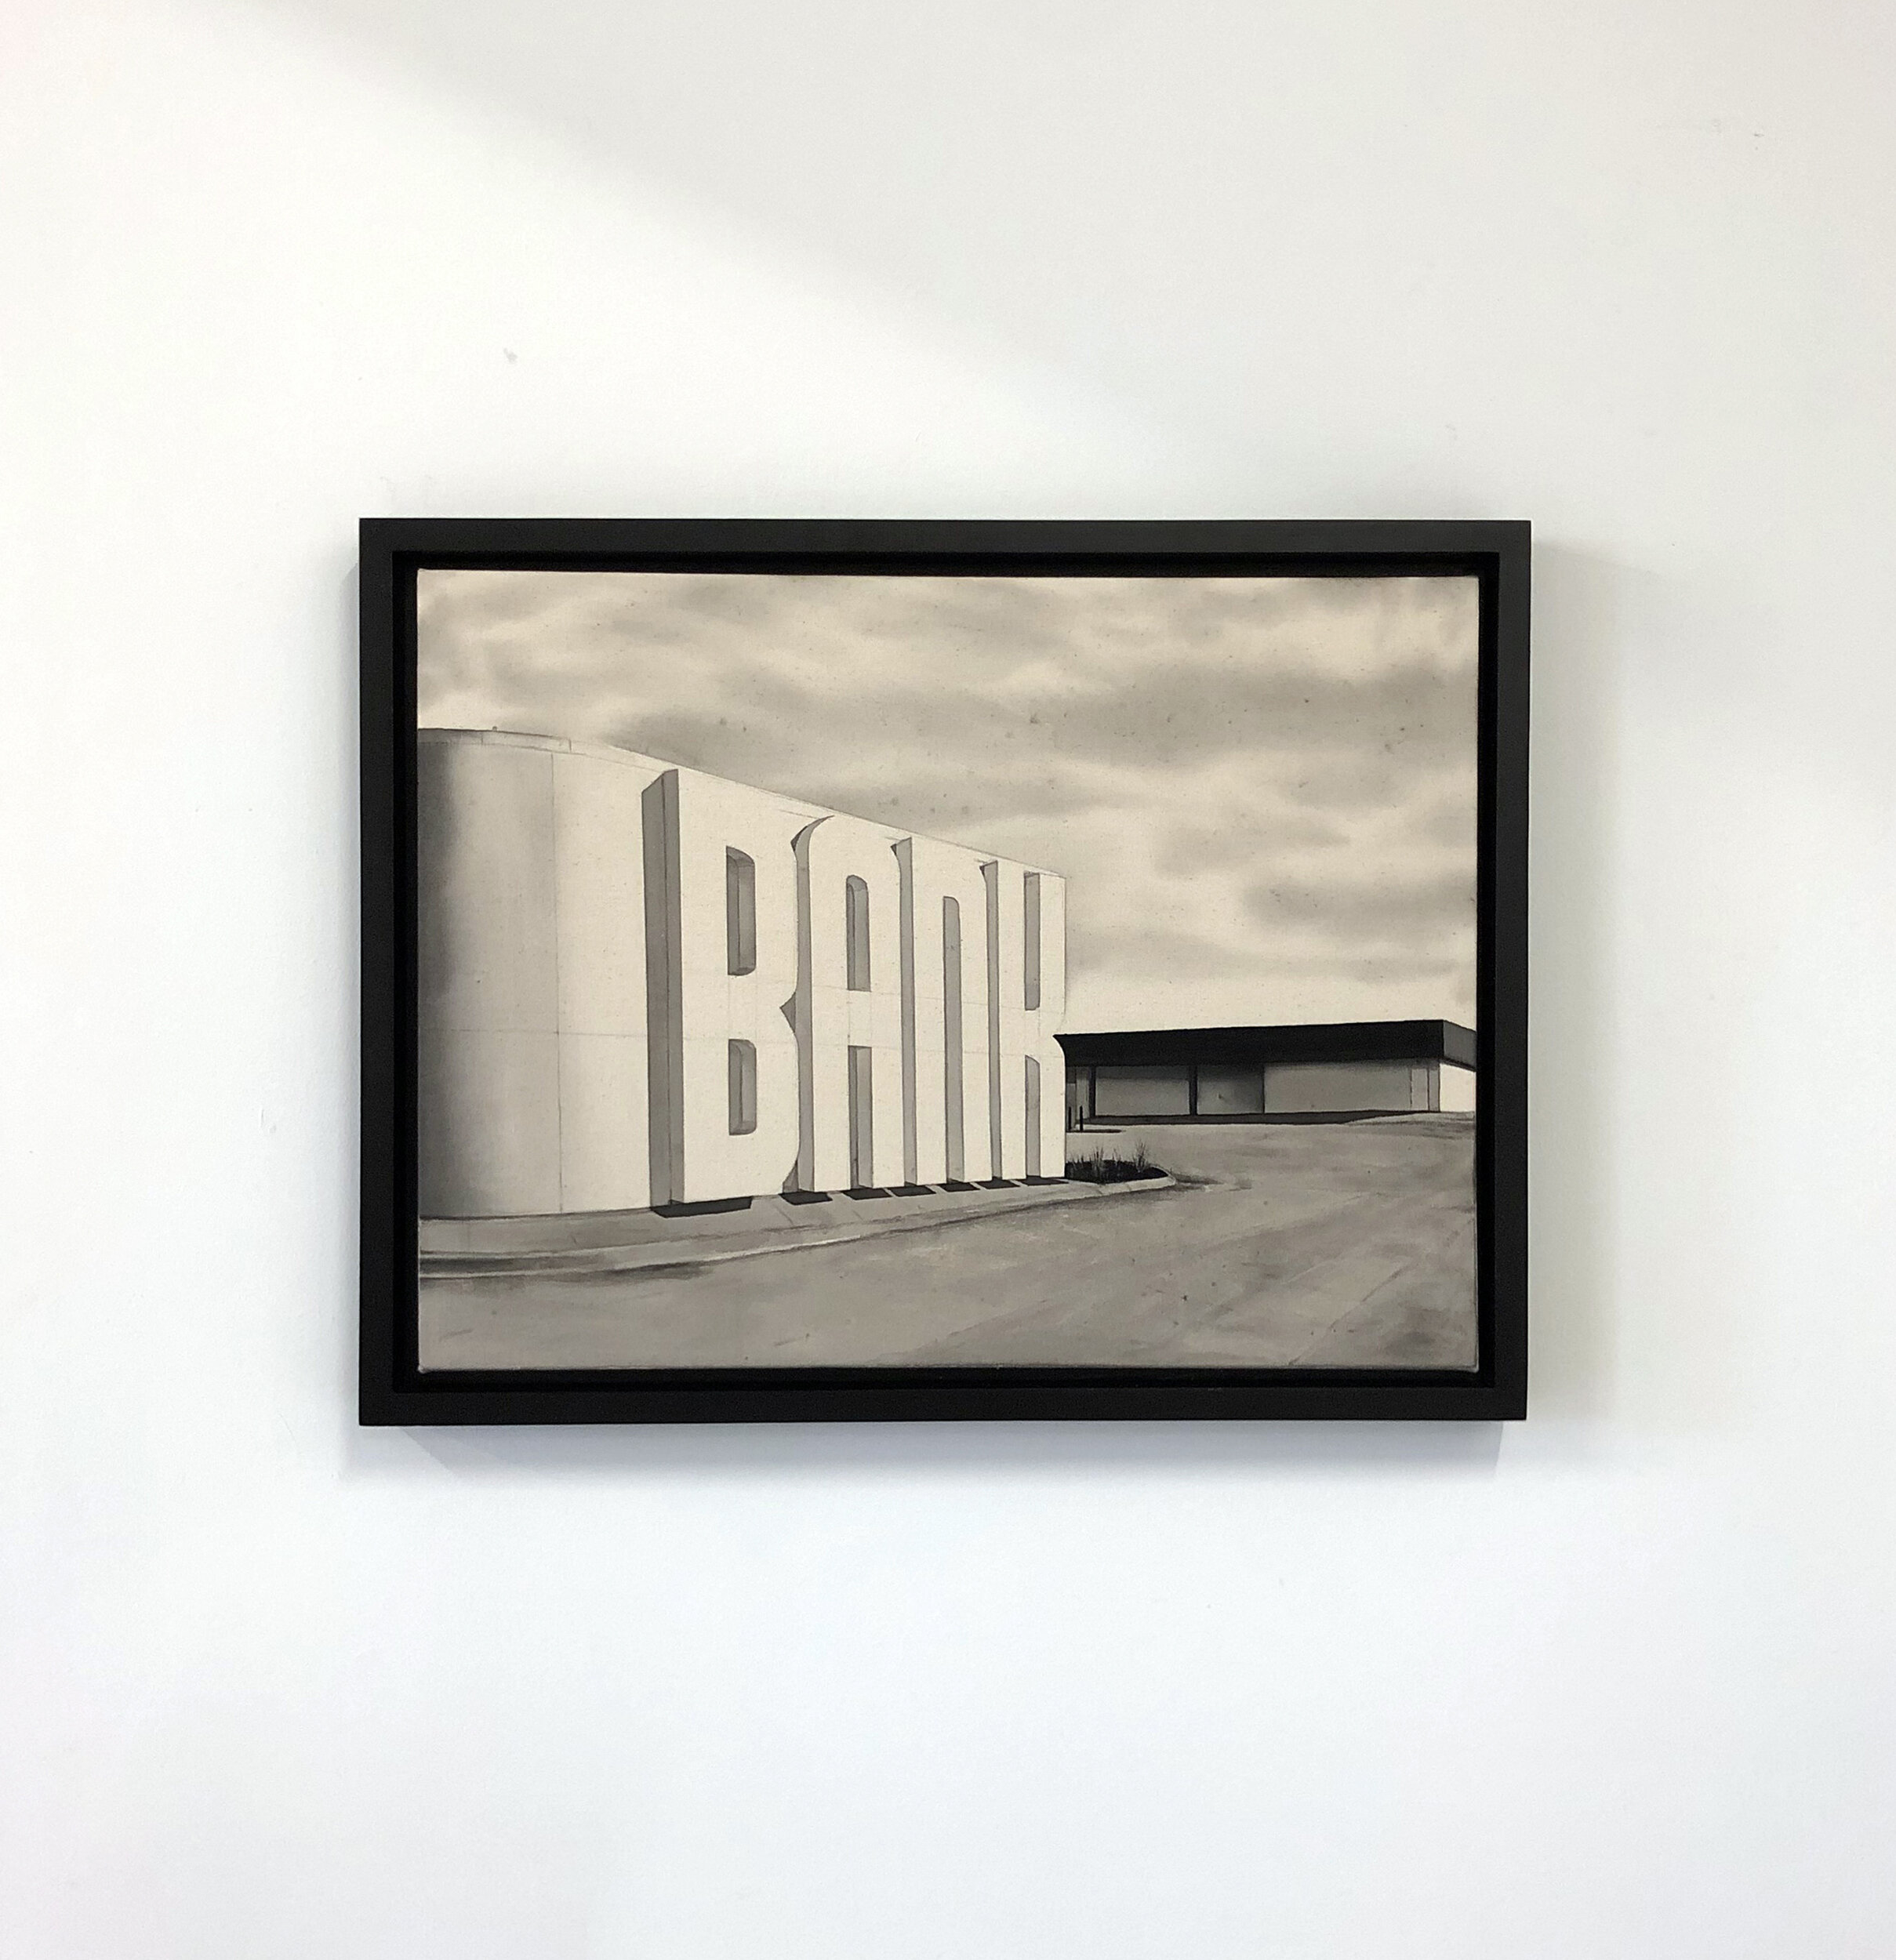   Omaha (for Ed Ruscha) , 2020 Black gesso on canvas 18 x 24 inches (46cm x 61cm) 